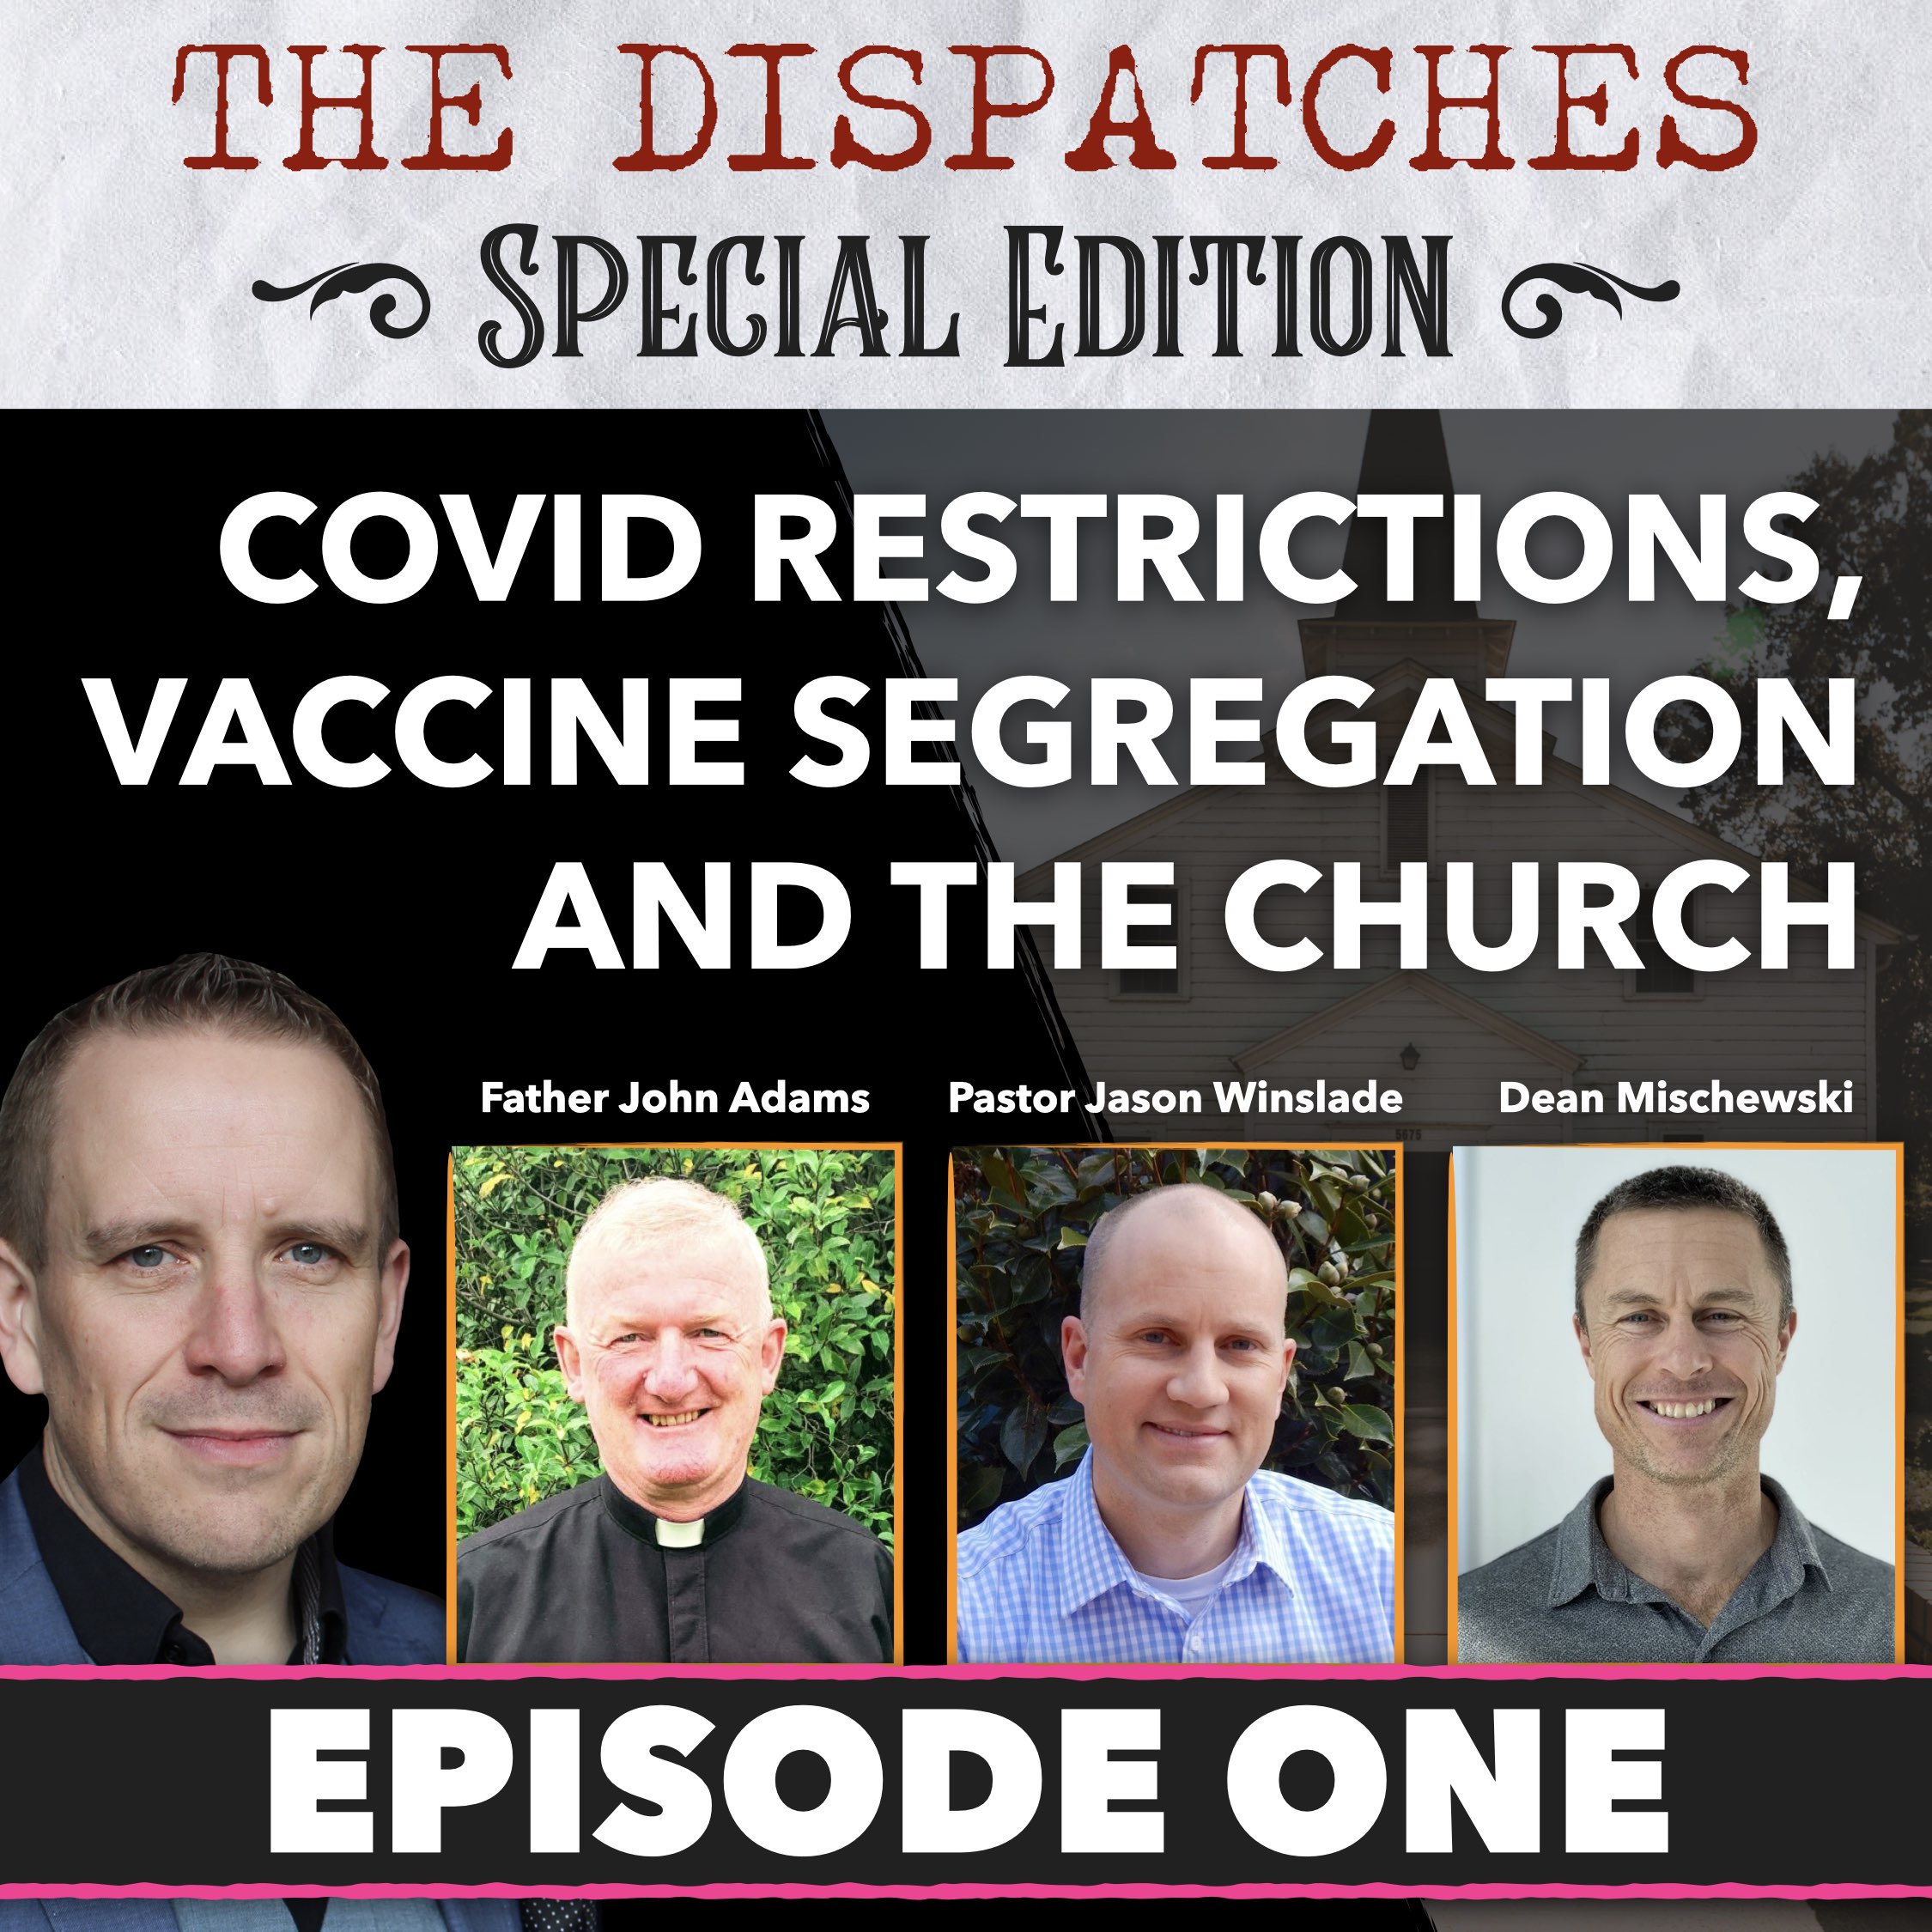 PART 1 - SPECIAL EDITION: COVID Restrictions, Vaccine Segregation, and The Church